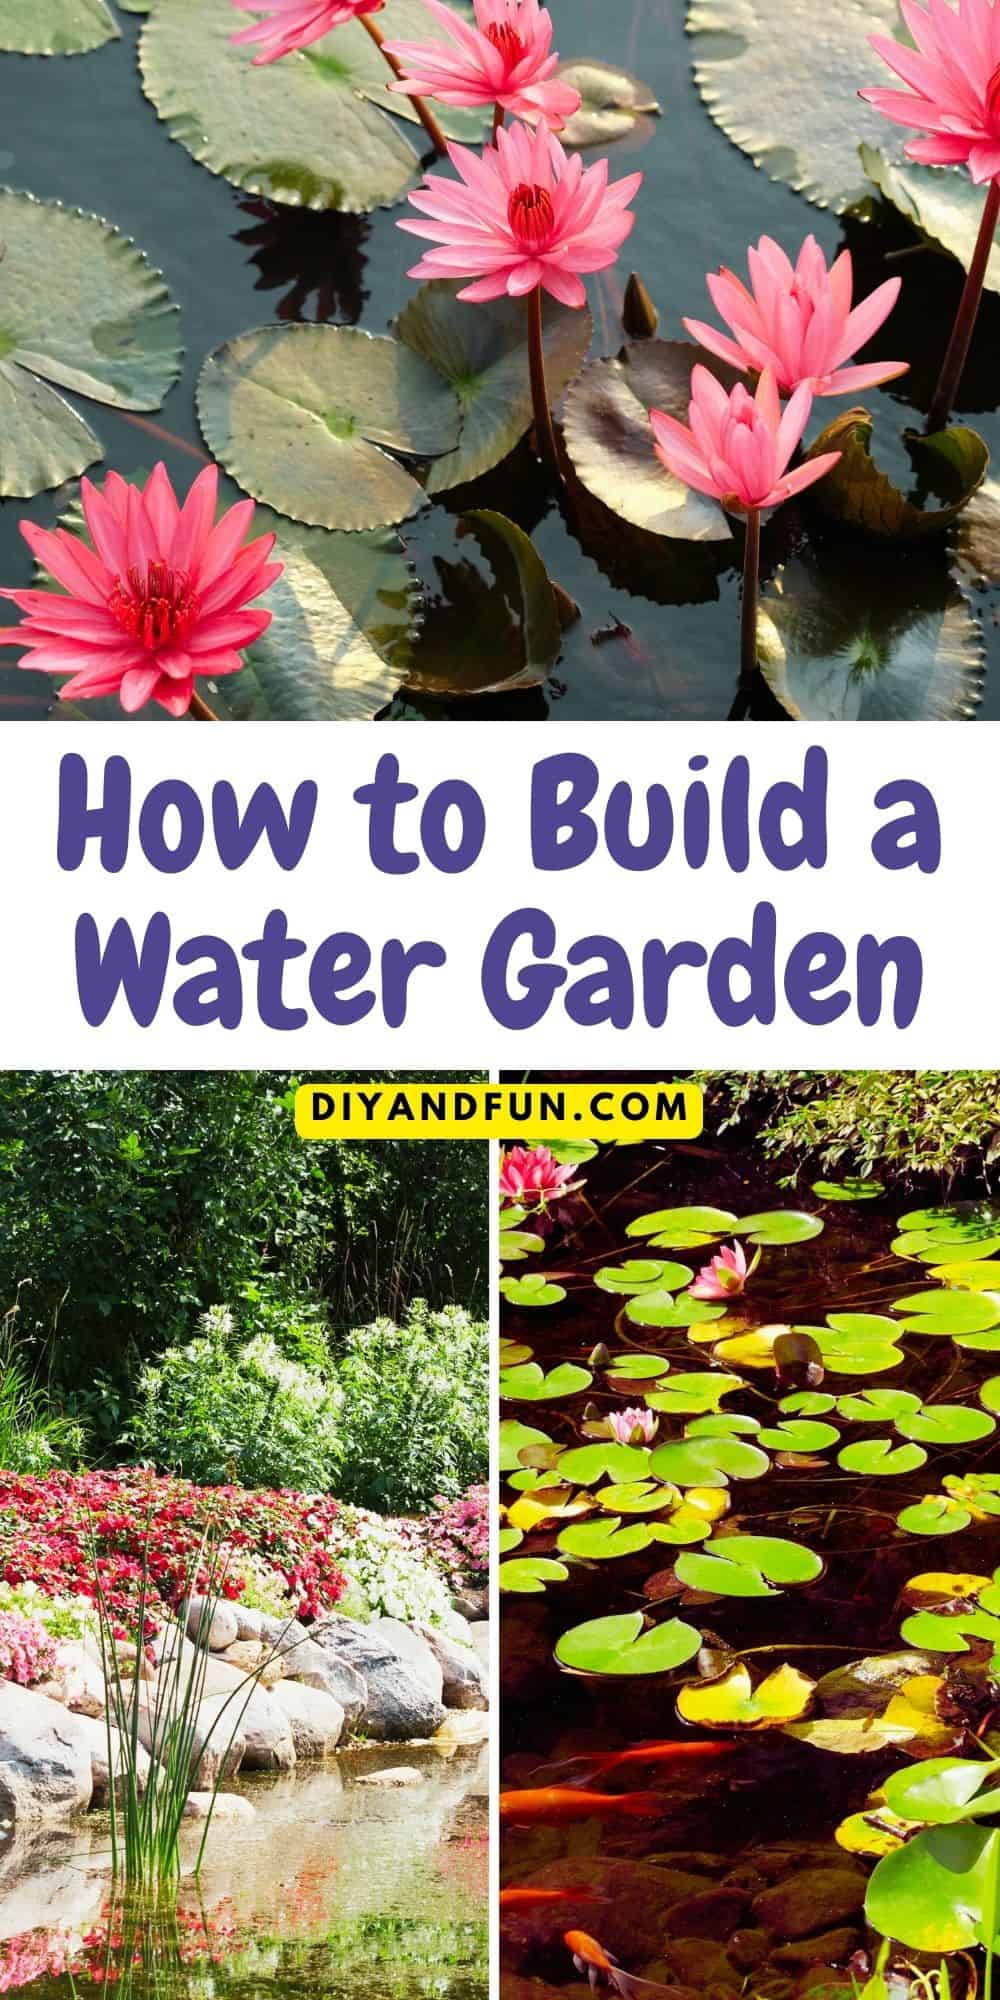 How to Build a Water Garden, a simple guide that including what plants to place in your backyard garden with water.